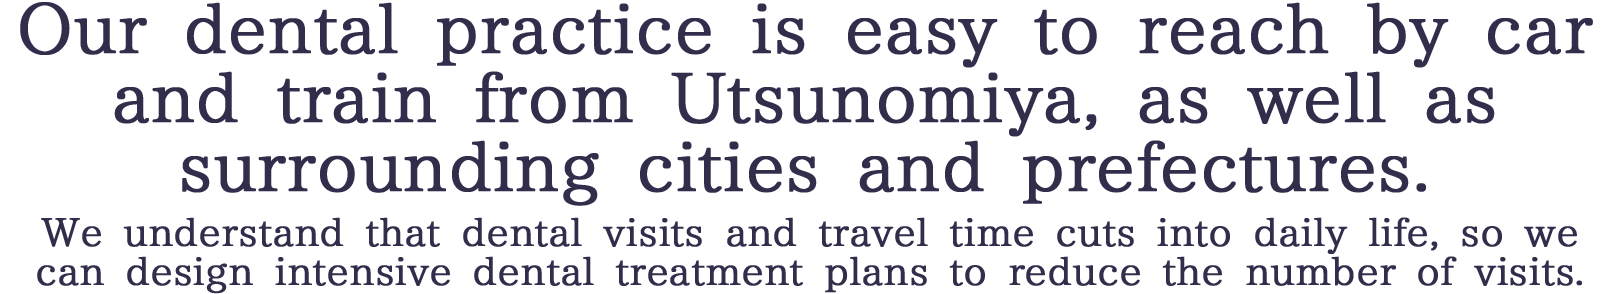 Our dental practice is easy to reach by car and train from Utsunomiya, as well as surrounding cities and prefectures.We understand that dental visits and travel time cuts into daily life, so we can design intensive dental treatment plans to reduce the number of visits.
